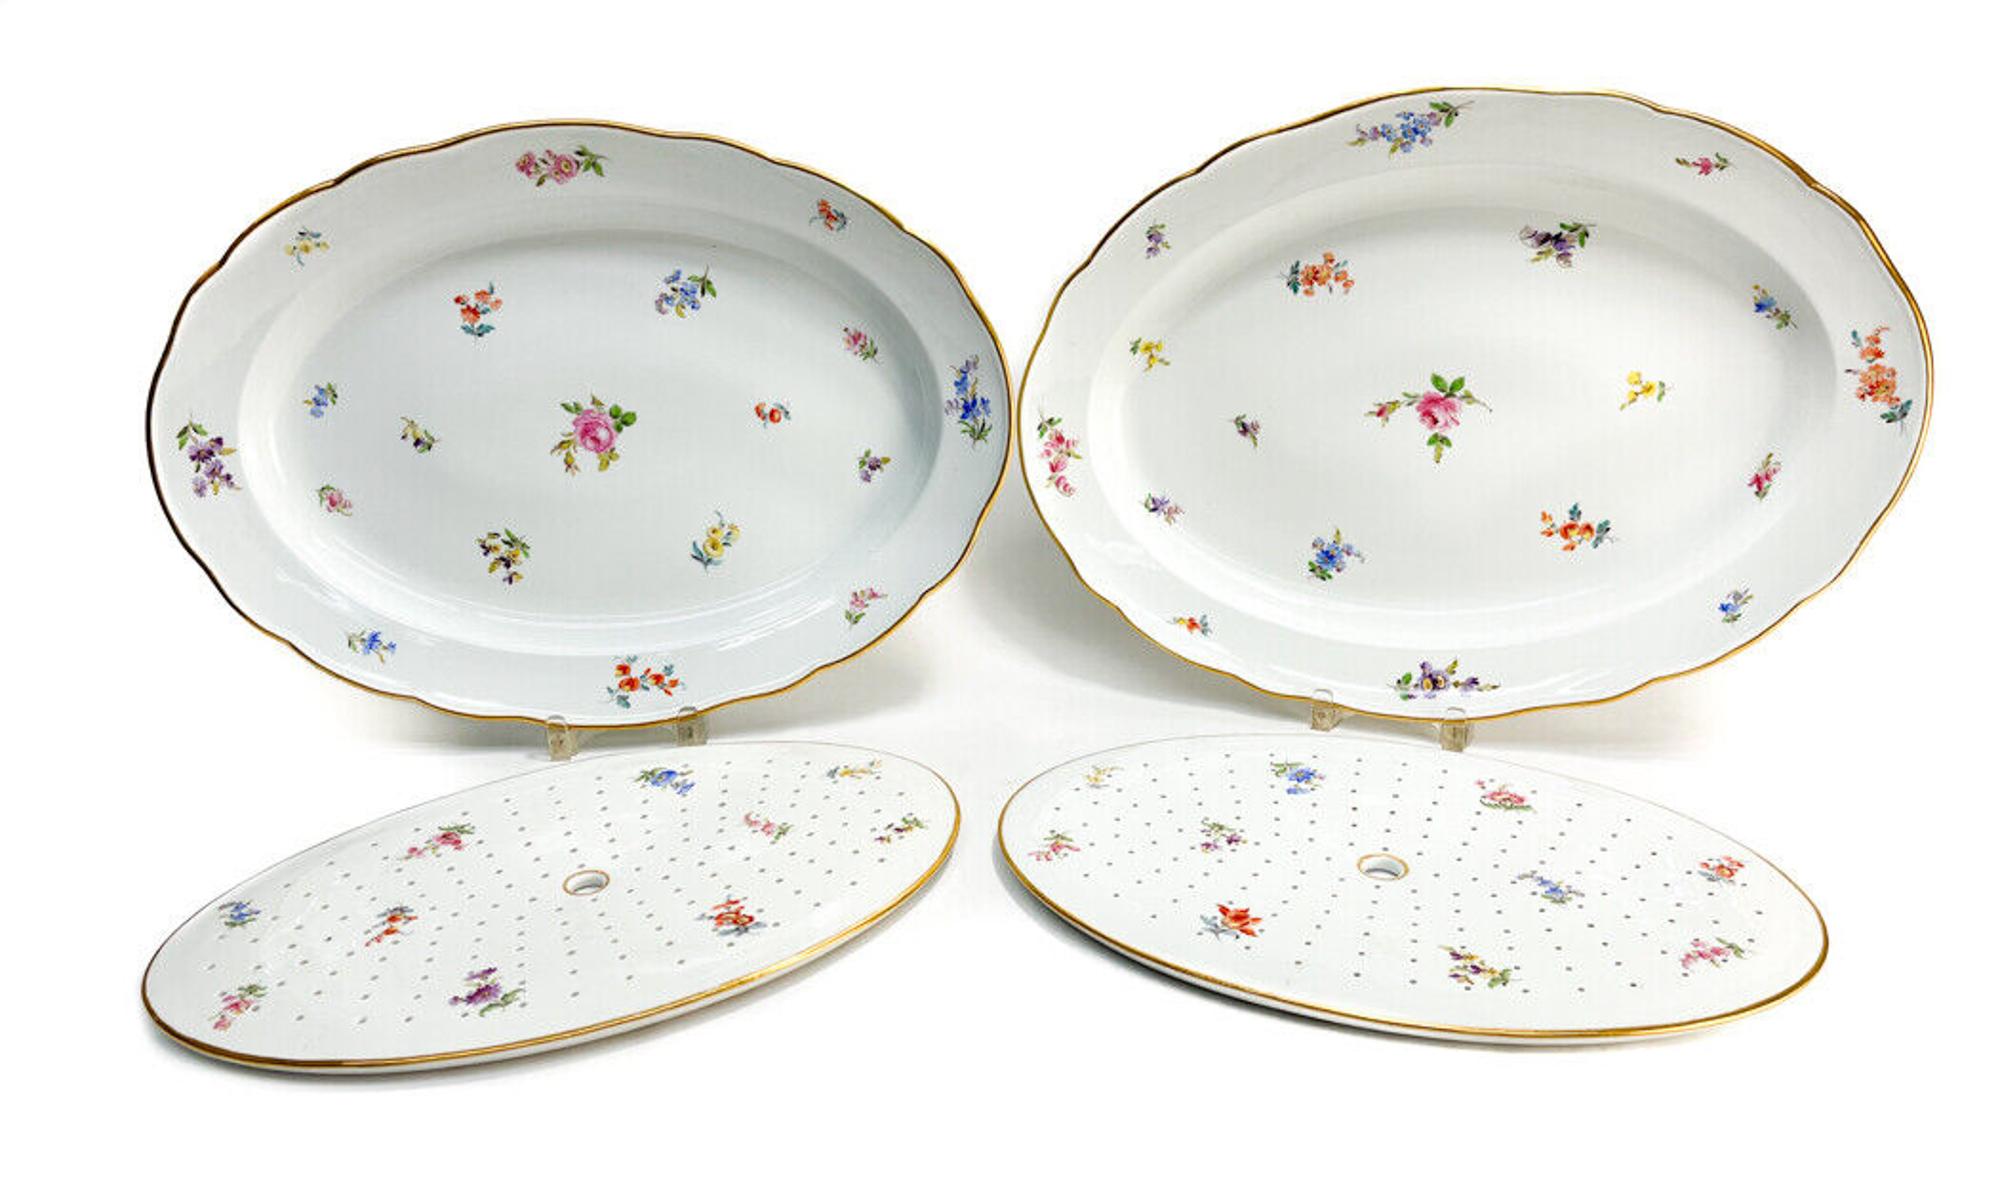 Pair Meissen Germany Porcelain Serving Entrée Dishes. Hand painted scattered florals throughout. With an insert strainer to each tray. Meissen marks to the underside.

Additional Information: 
Type: Serving Entrée Dishes
Weight Approx., 16